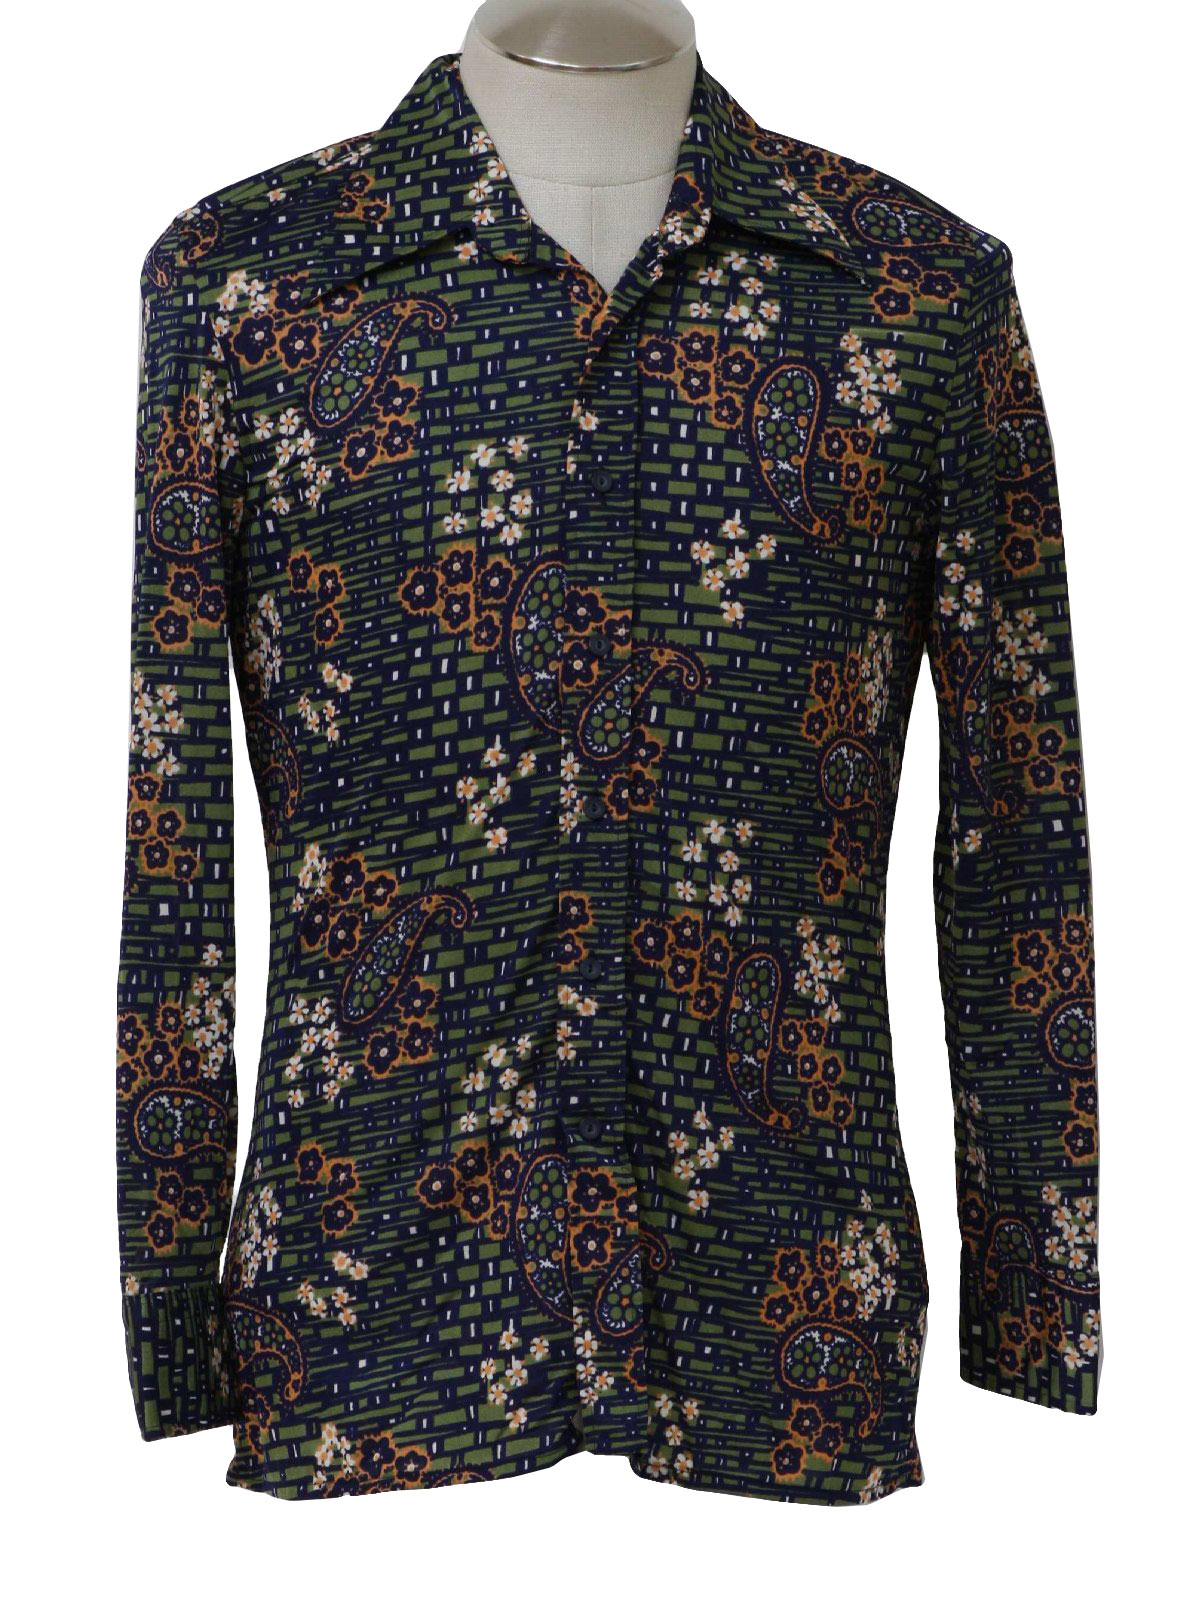 Seventies Print Disco Shirt: 70s -Made in Italy for The Emporium- Mens ...